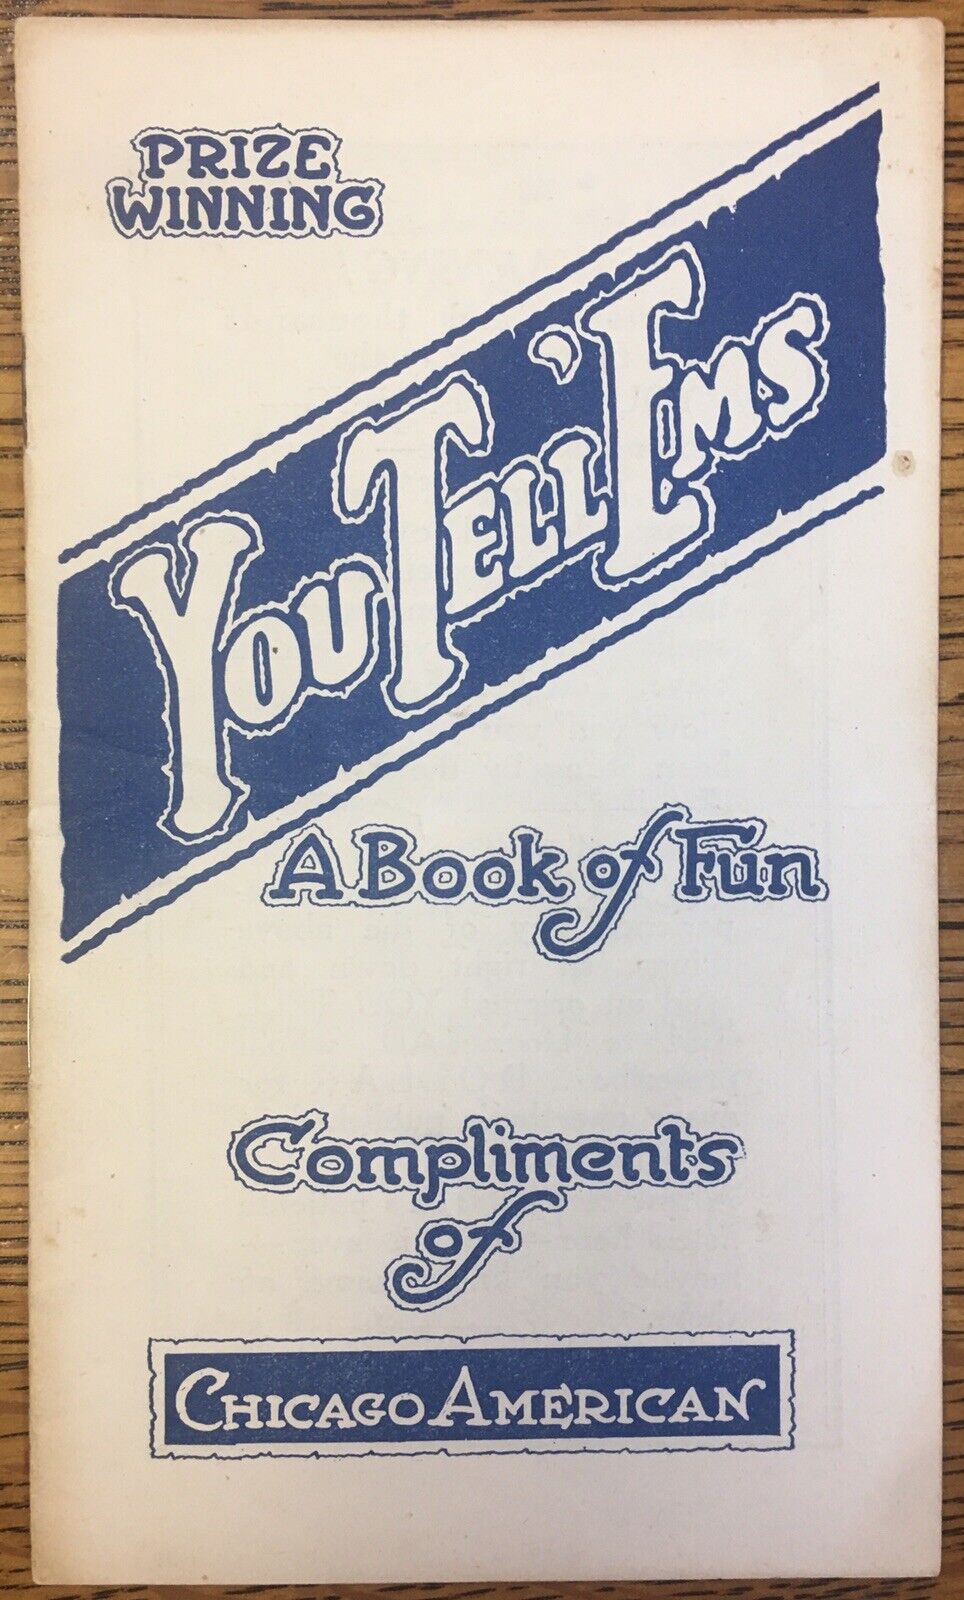 Prize Winning You Tell ‘Ems, A Book of Fun, Chicago American